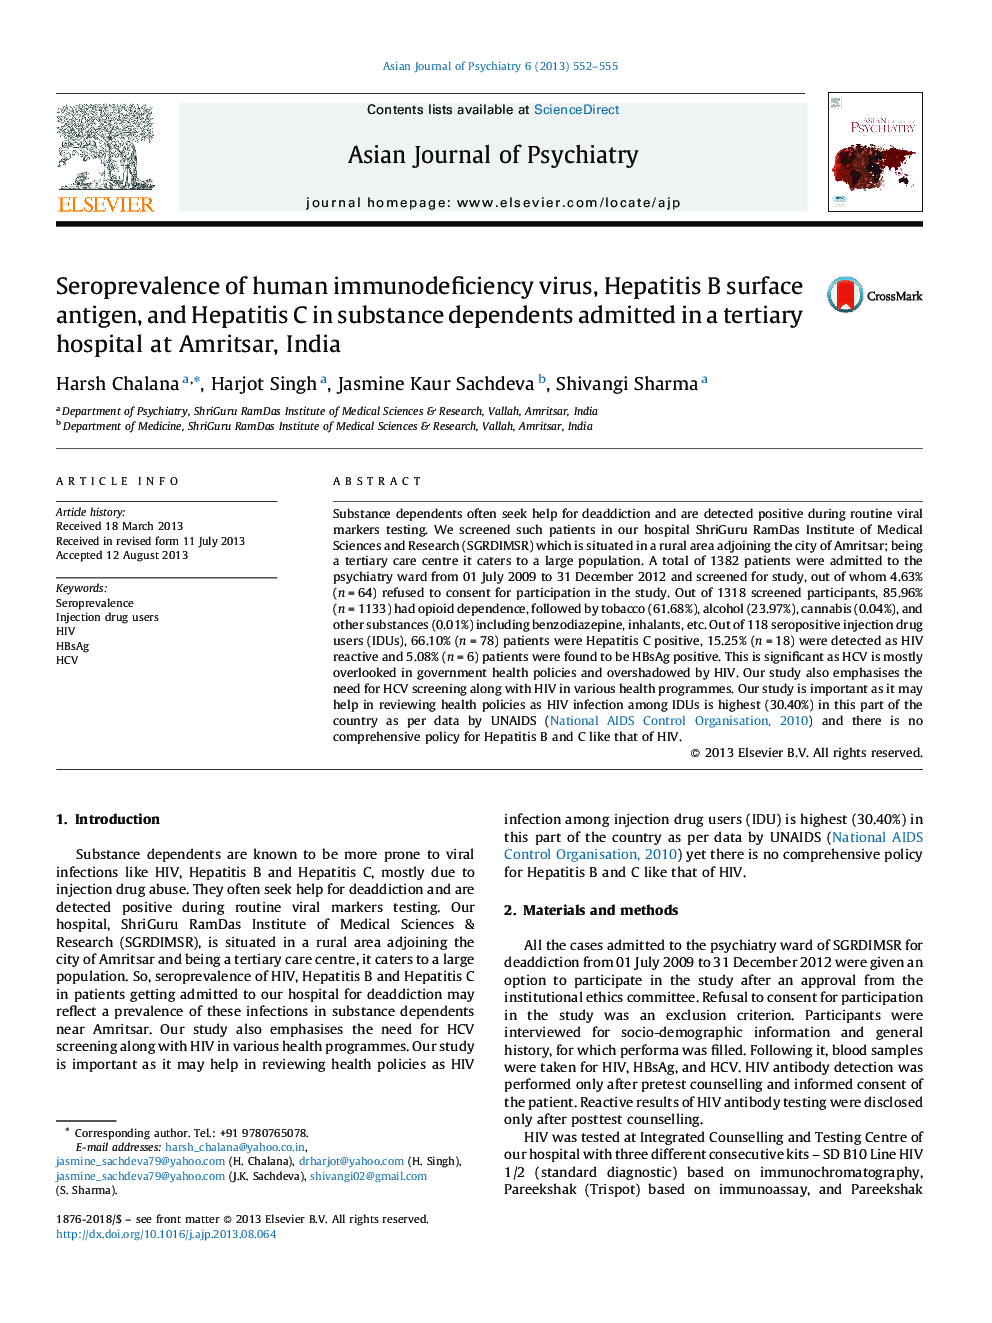 Seroprevalence of human immunodeficiency virus, Hepatitis B surface antigen, and Hepatitis C in substance dependents admitted in a tertiary hospital at Amritsar, India